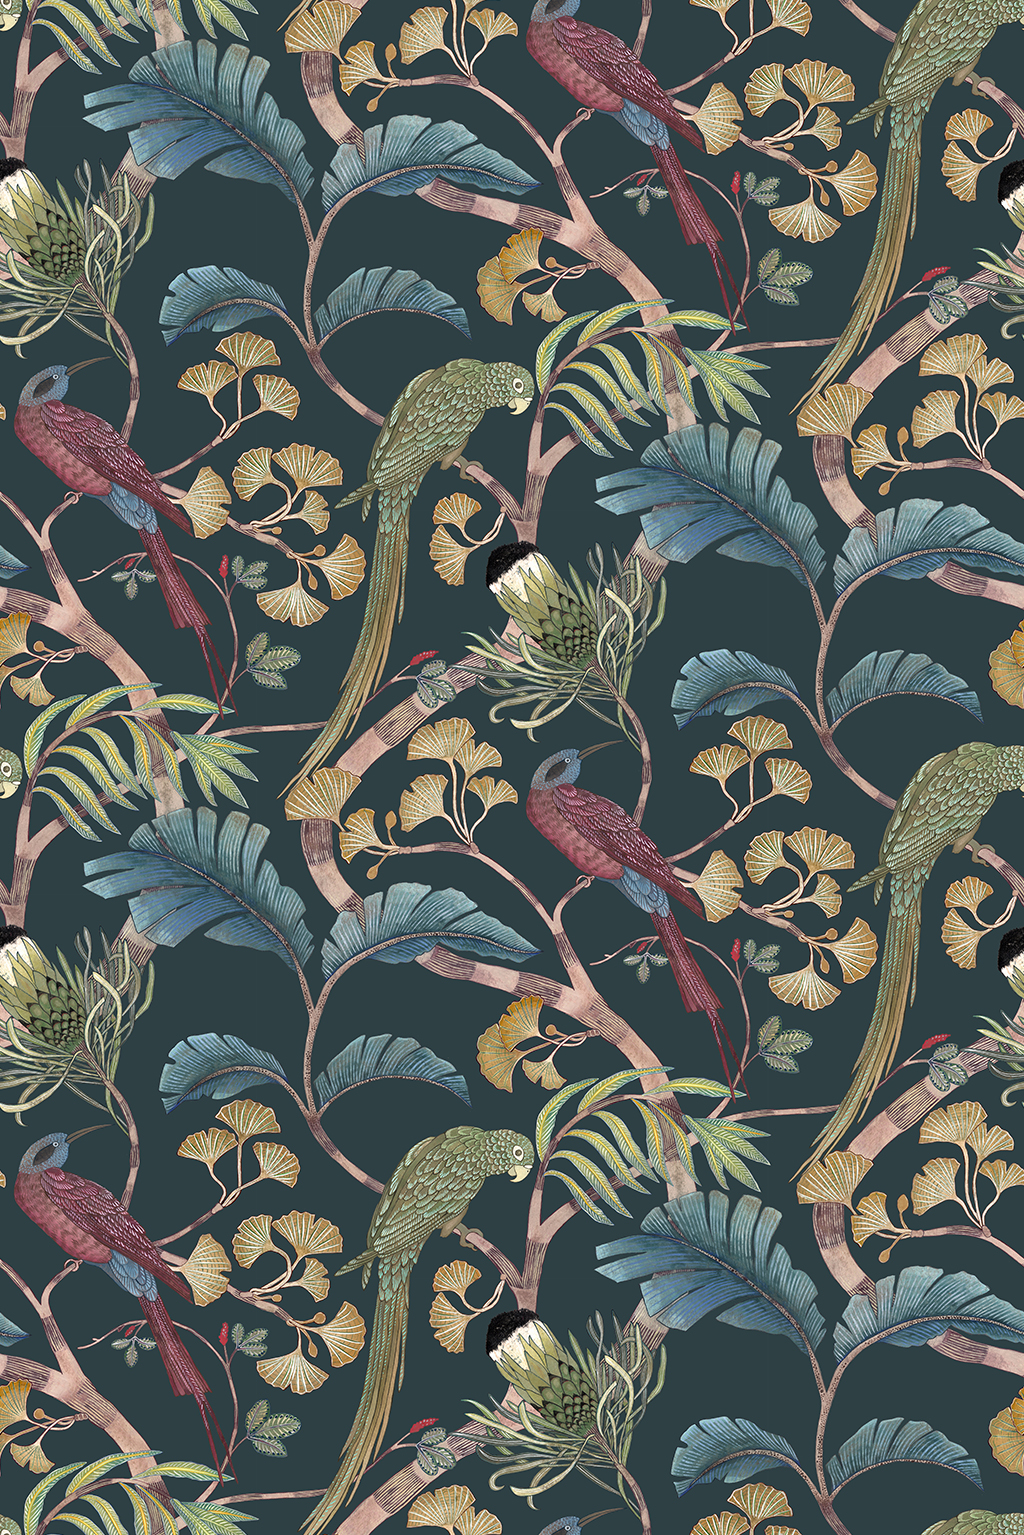 Living Branches Wallpaper - Dark Teal, Yellow and Olive